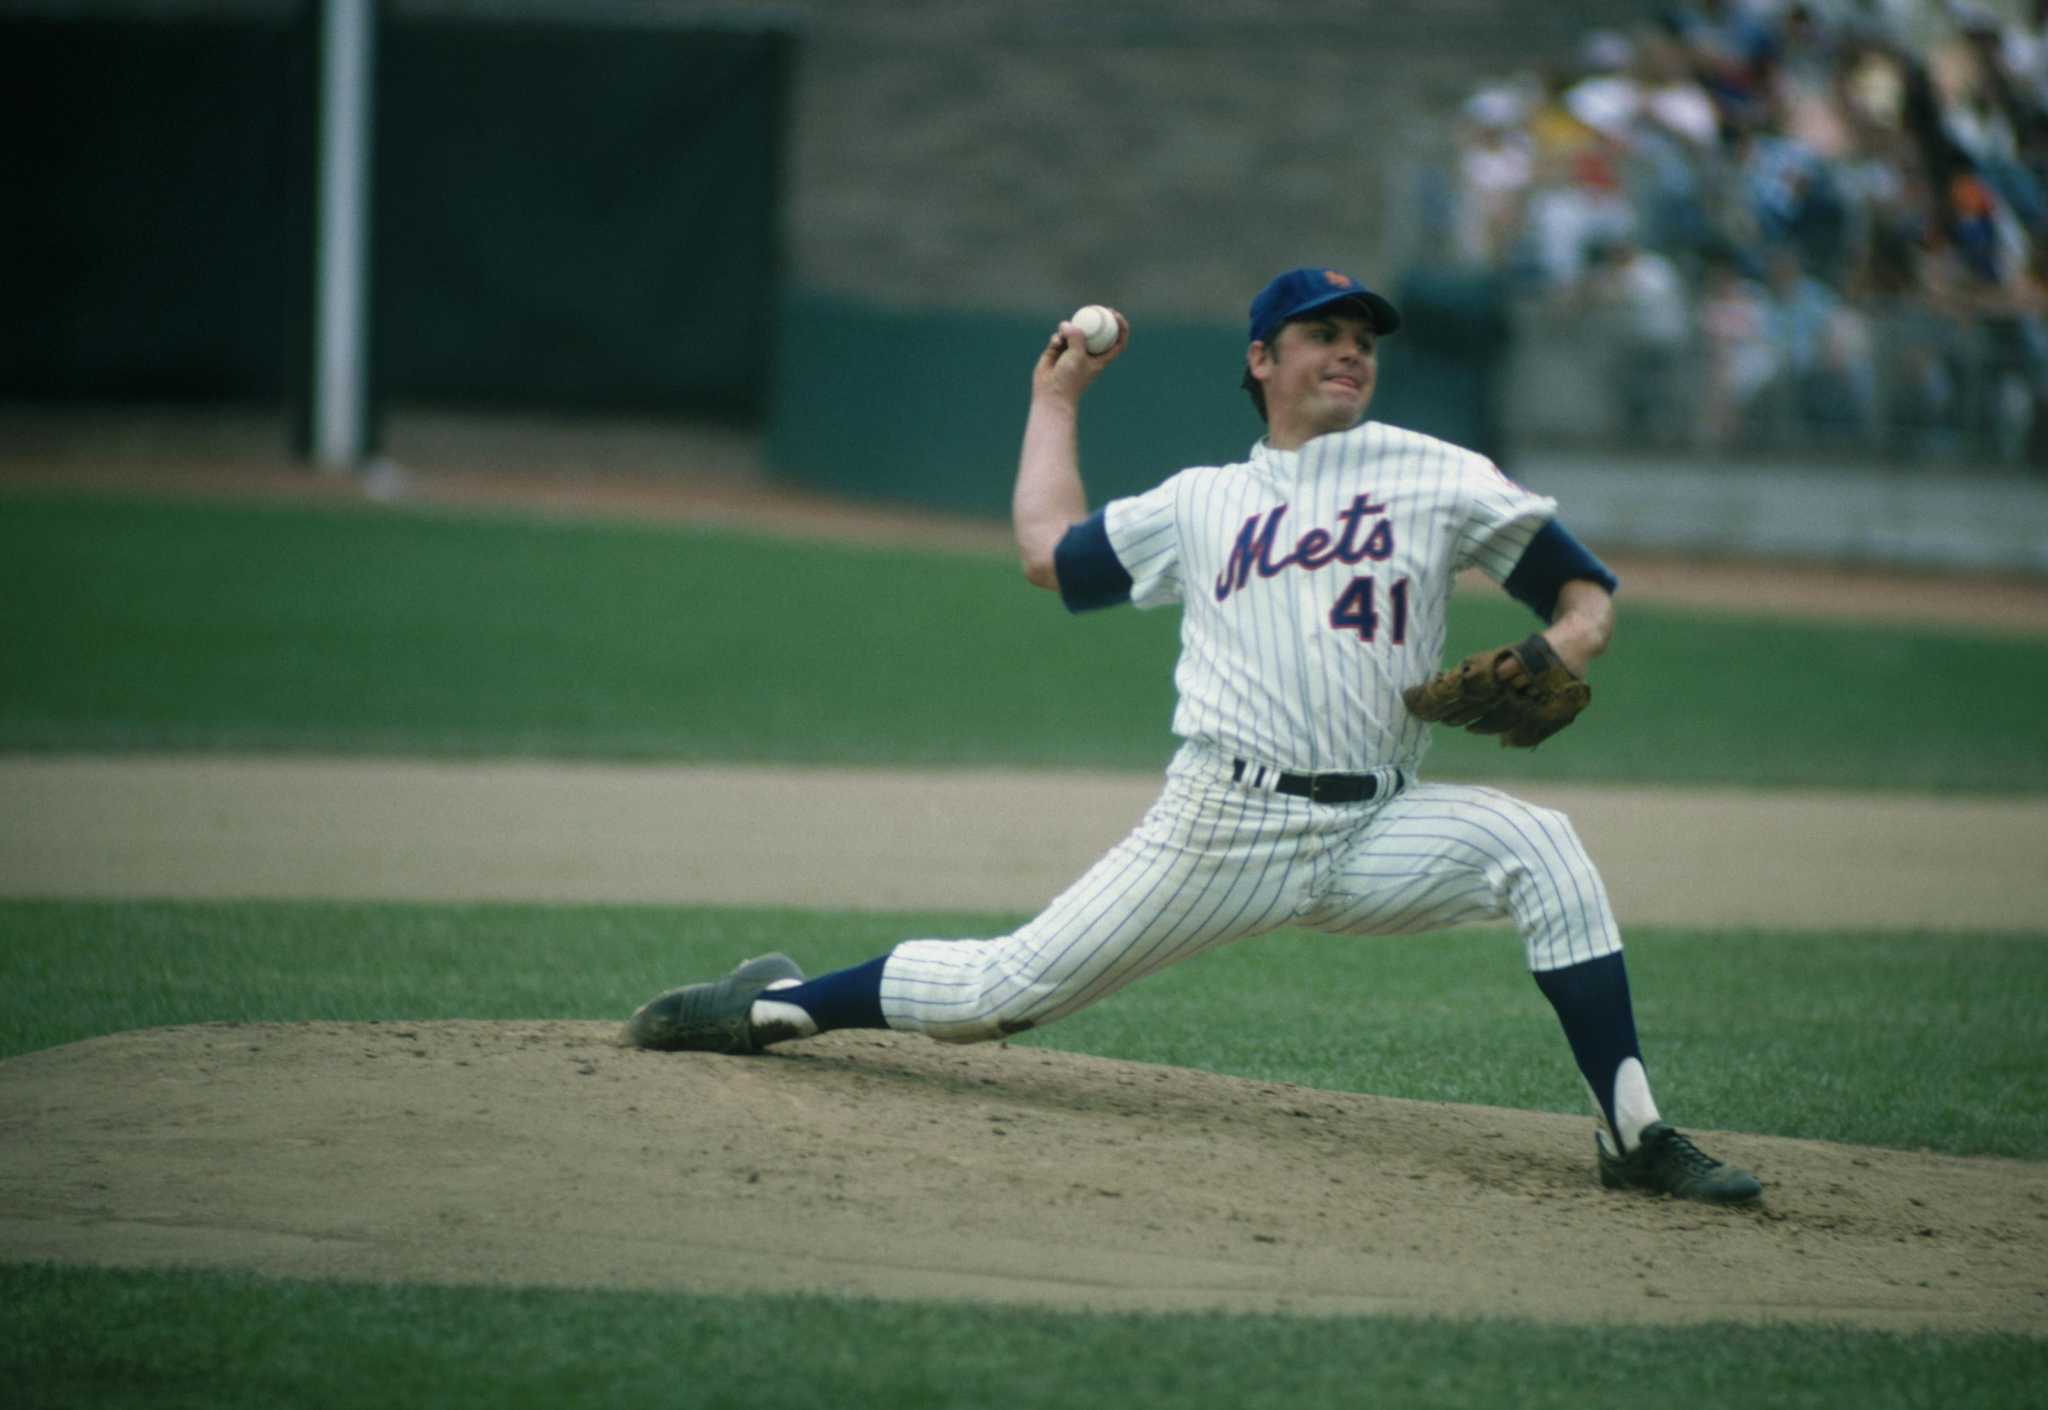 Tom Seaver, Pitcher Who Led 'Miracle Mets' to Glory, Dies at 75